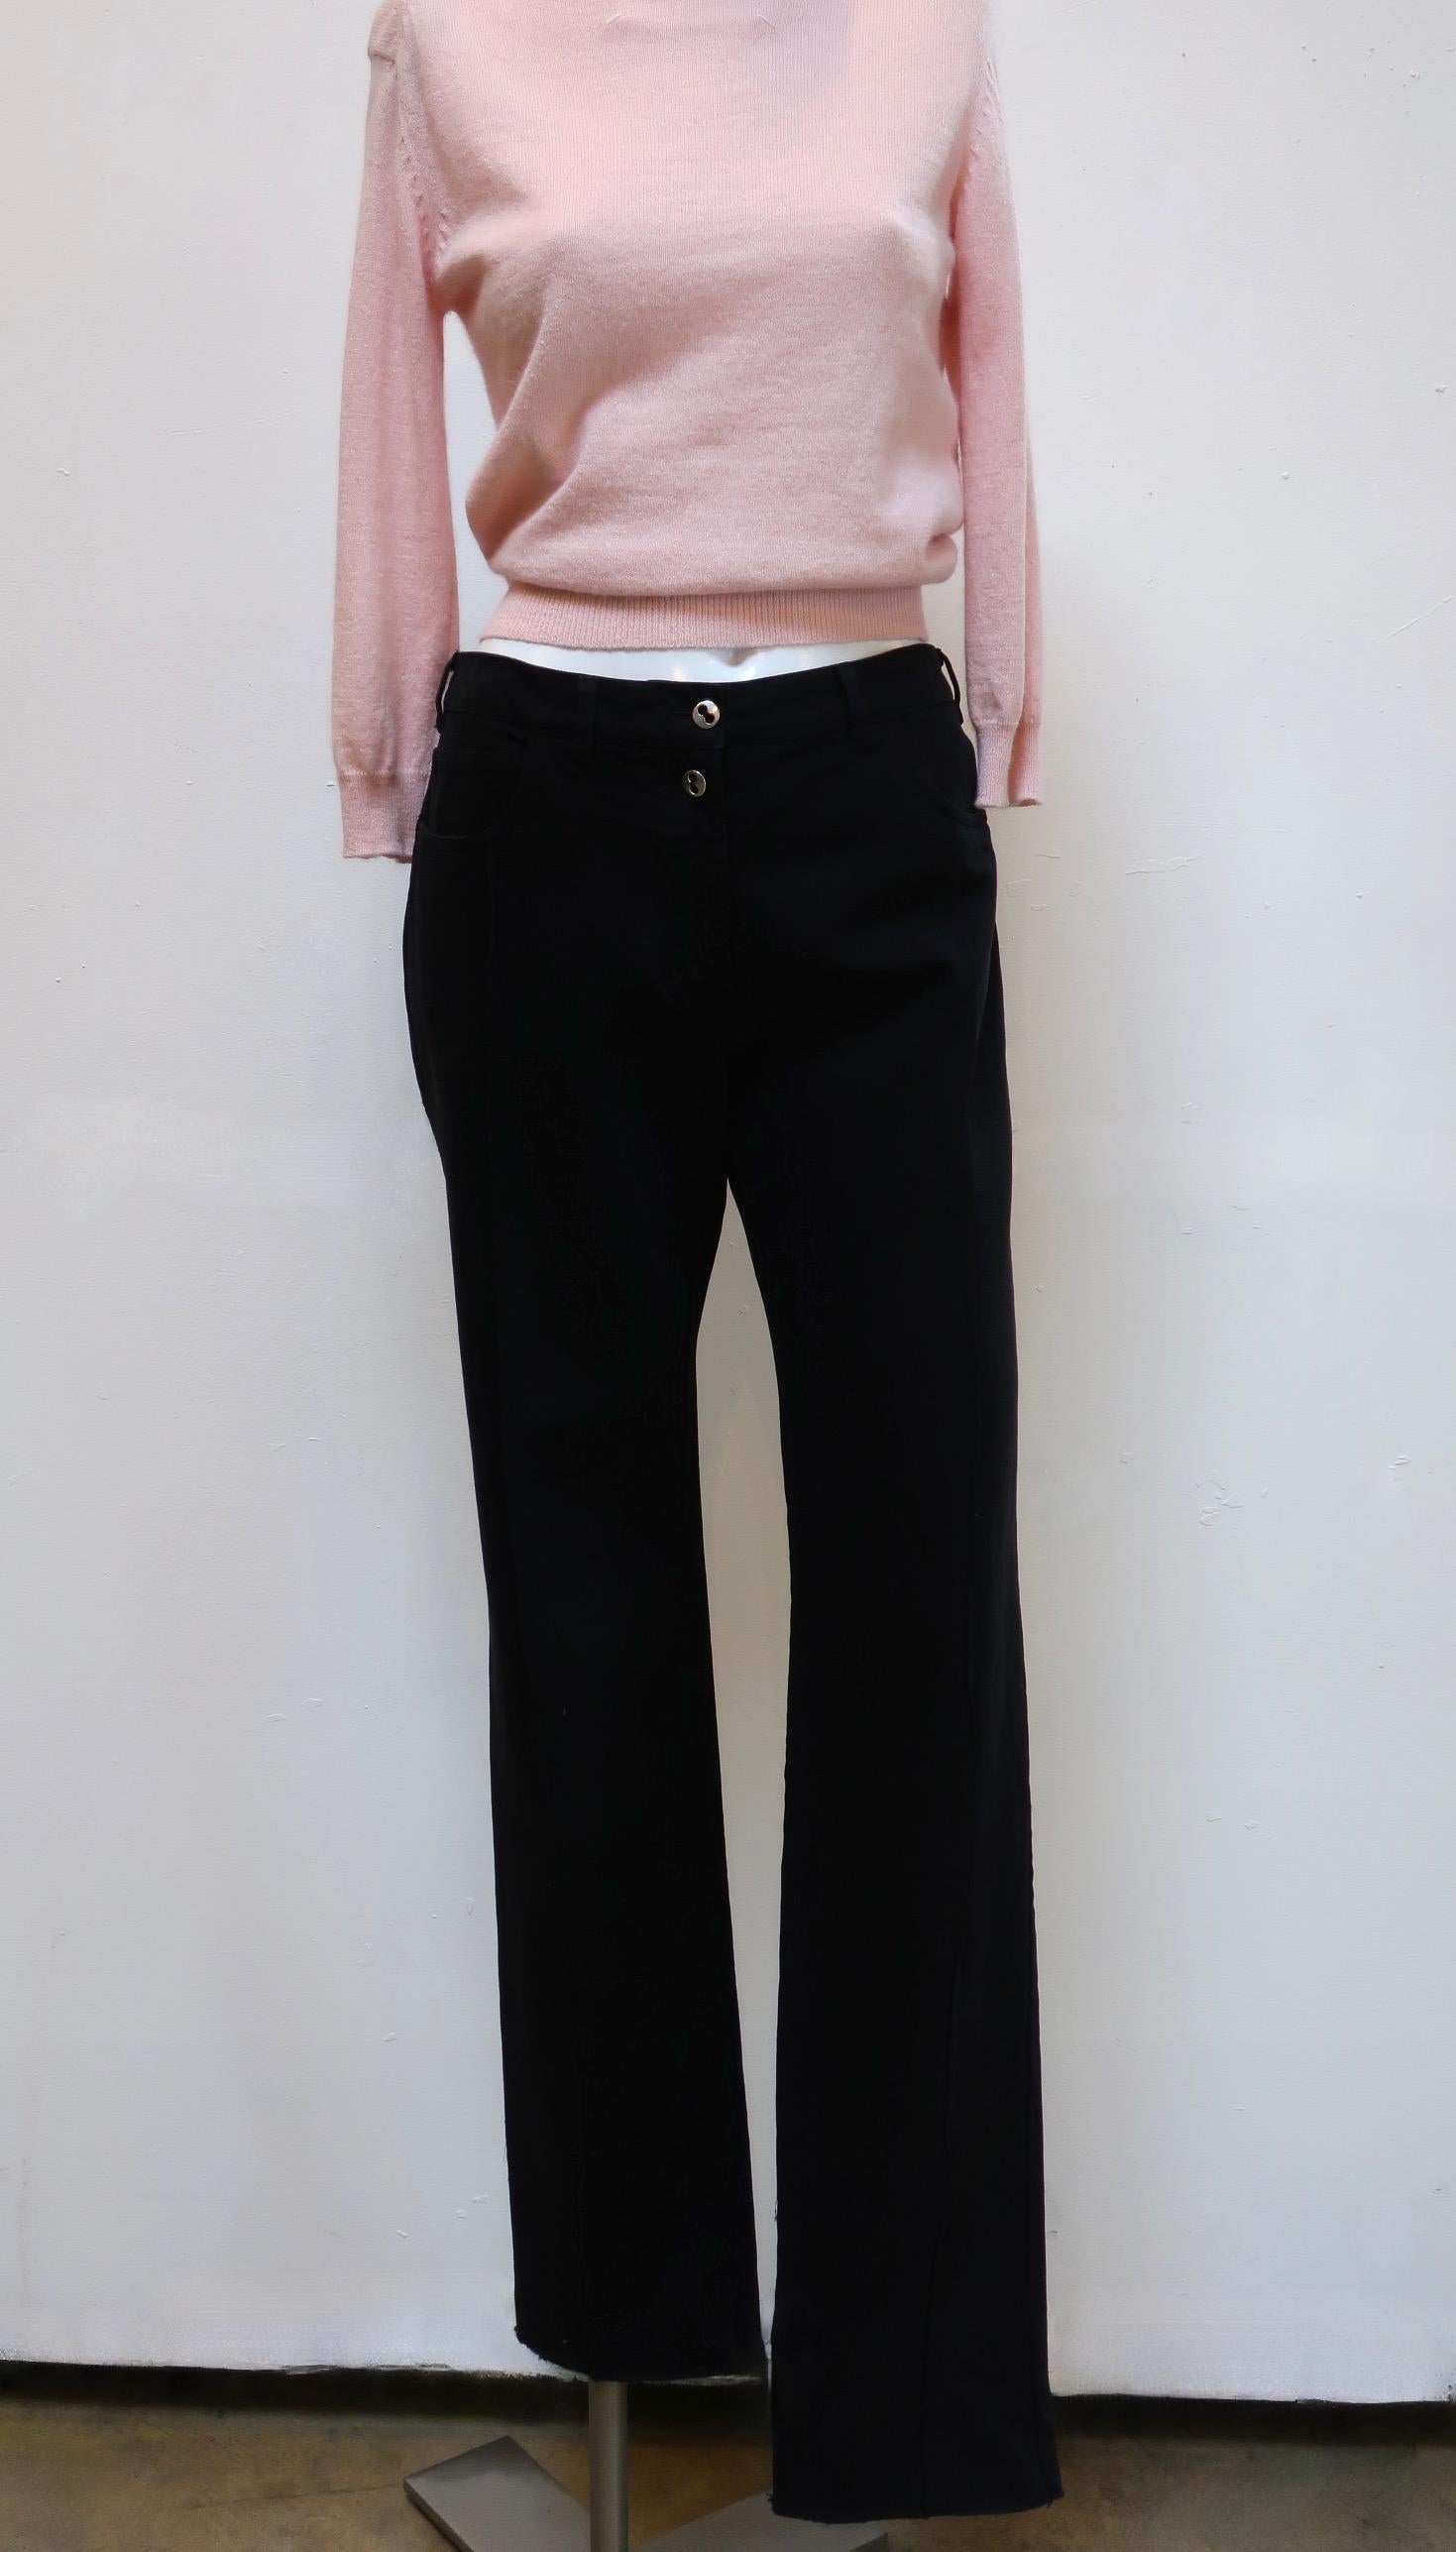 These casual high cut black pants from Maison Martin Margiela have narrow legs and are a sturdy textured cotton. Front seams, extending down from the front pockets, elevate these pants. 